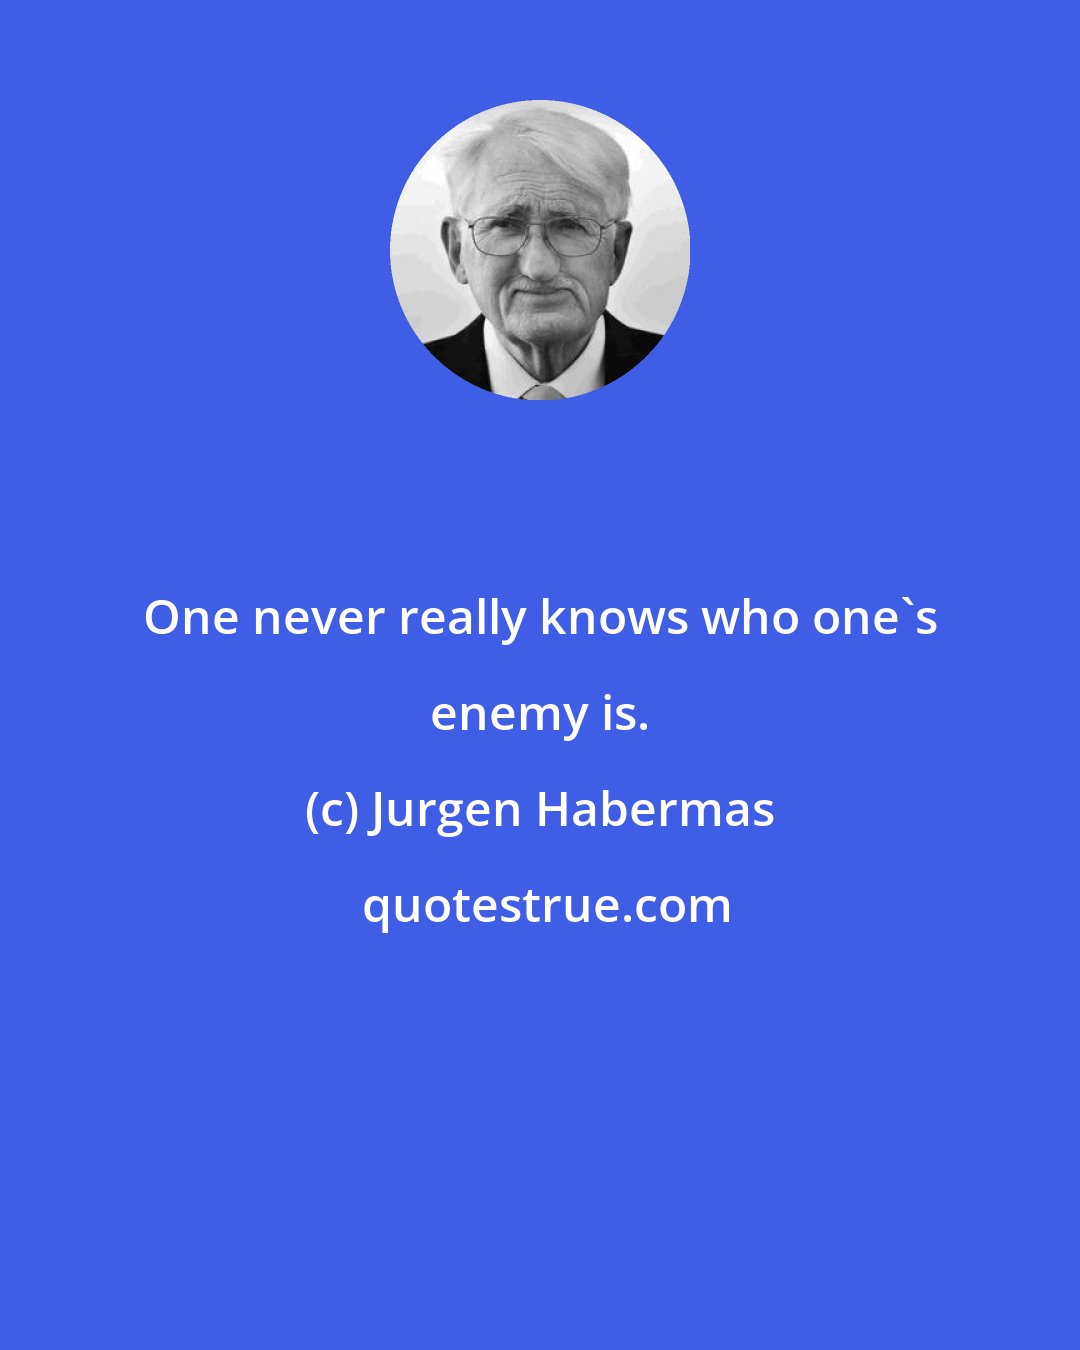 Jurgen Habermas: One never really knows who one's enemy is.